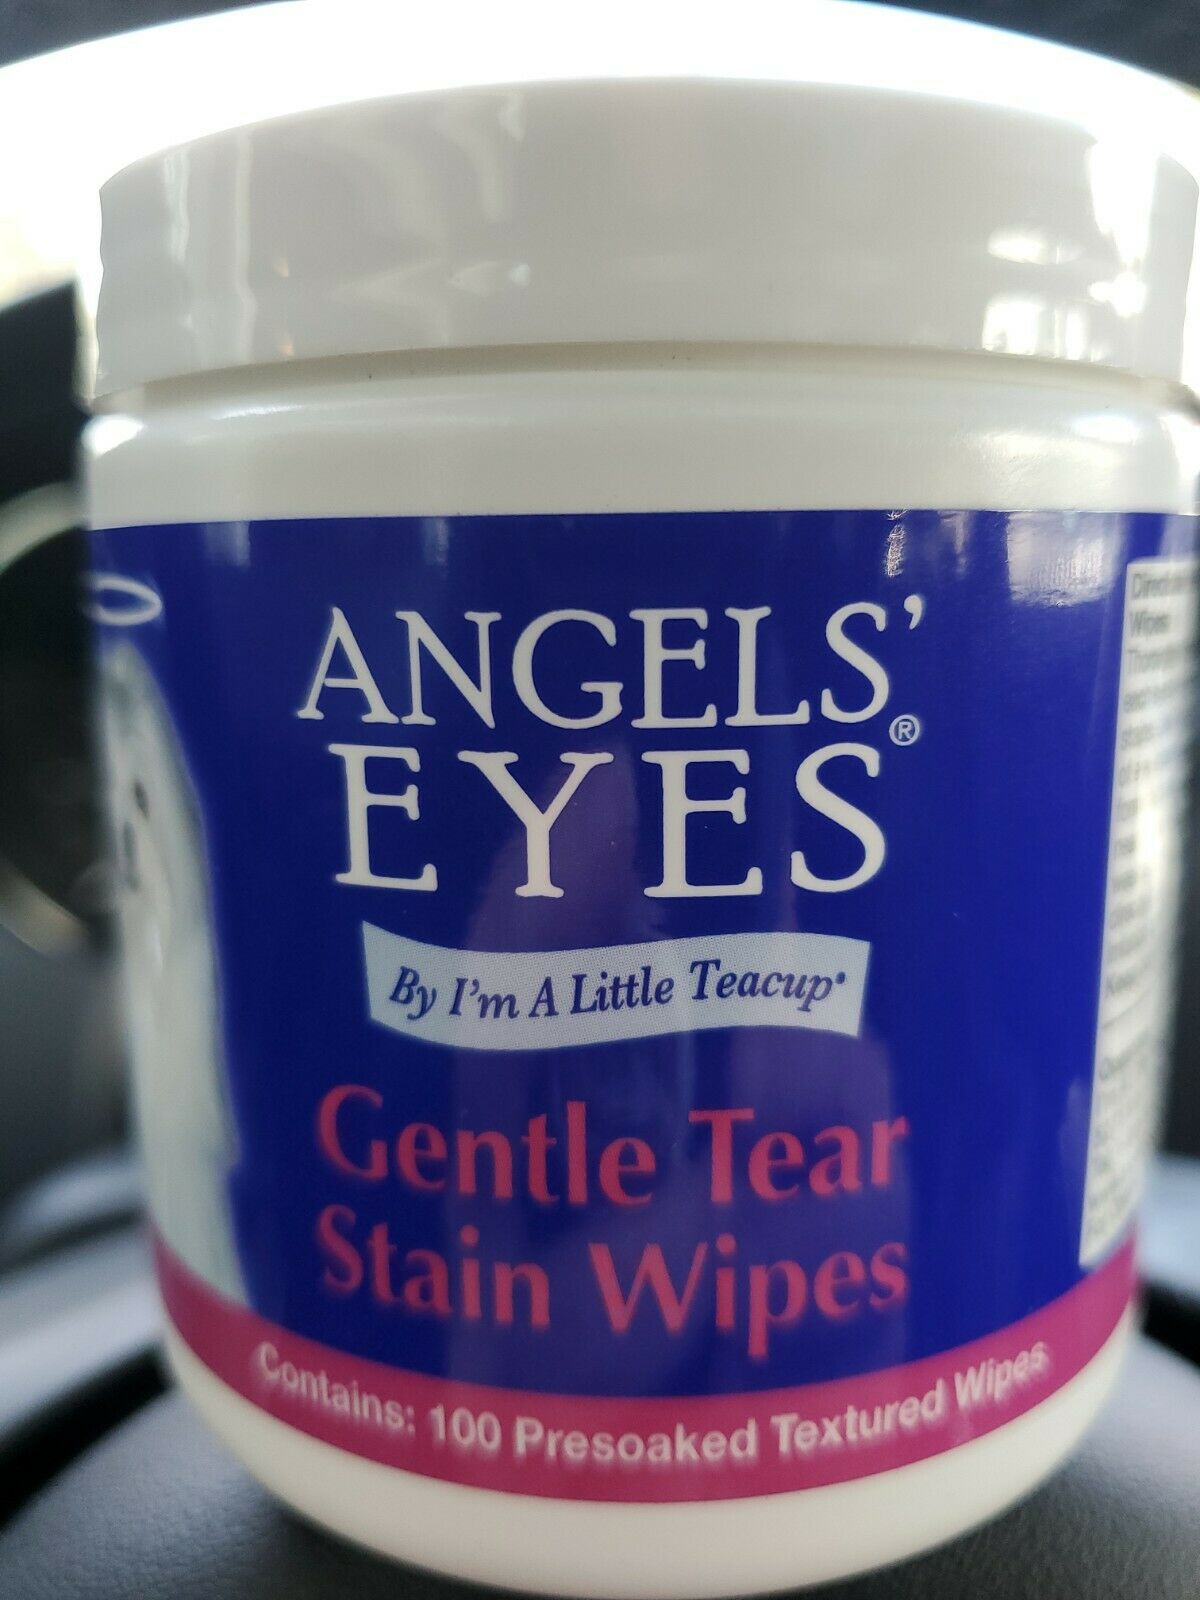 Angels' Eyes Gentle Tear Stain Wipes For Dogs - 100 Ct - Presoaked Textured